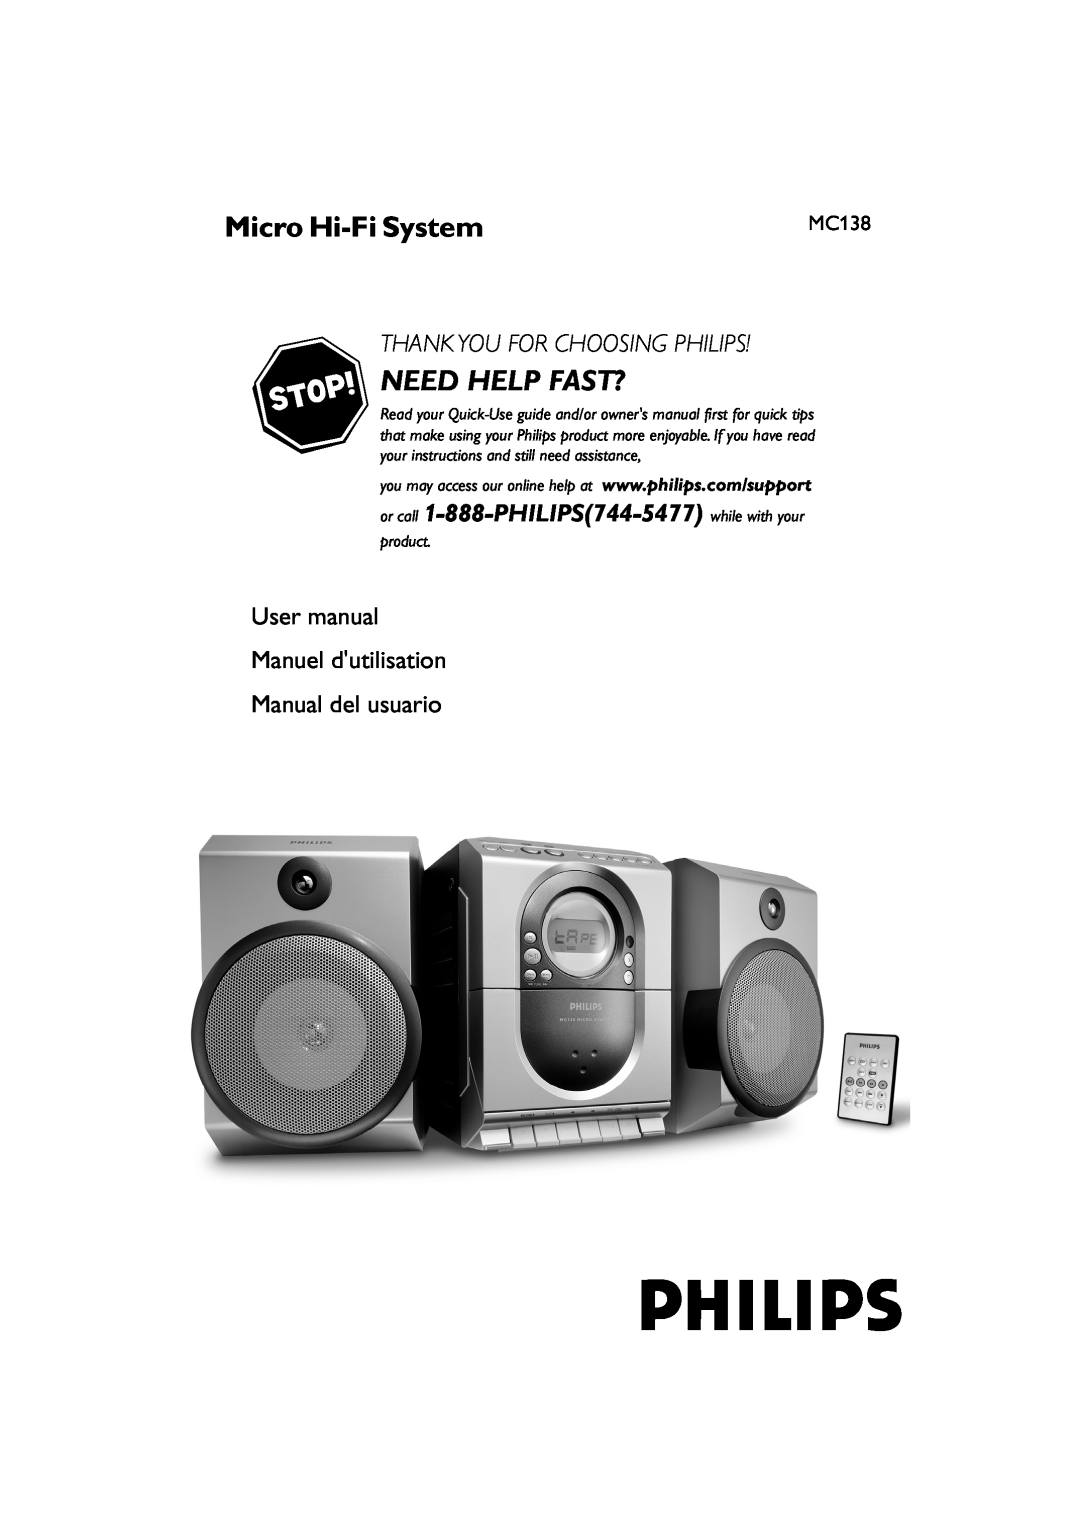 Philips MC138 owner manual Micro Hi-FiSystem, Need Help Fast?, or call 1-888-PHILIPS744-5477 while with your, product 